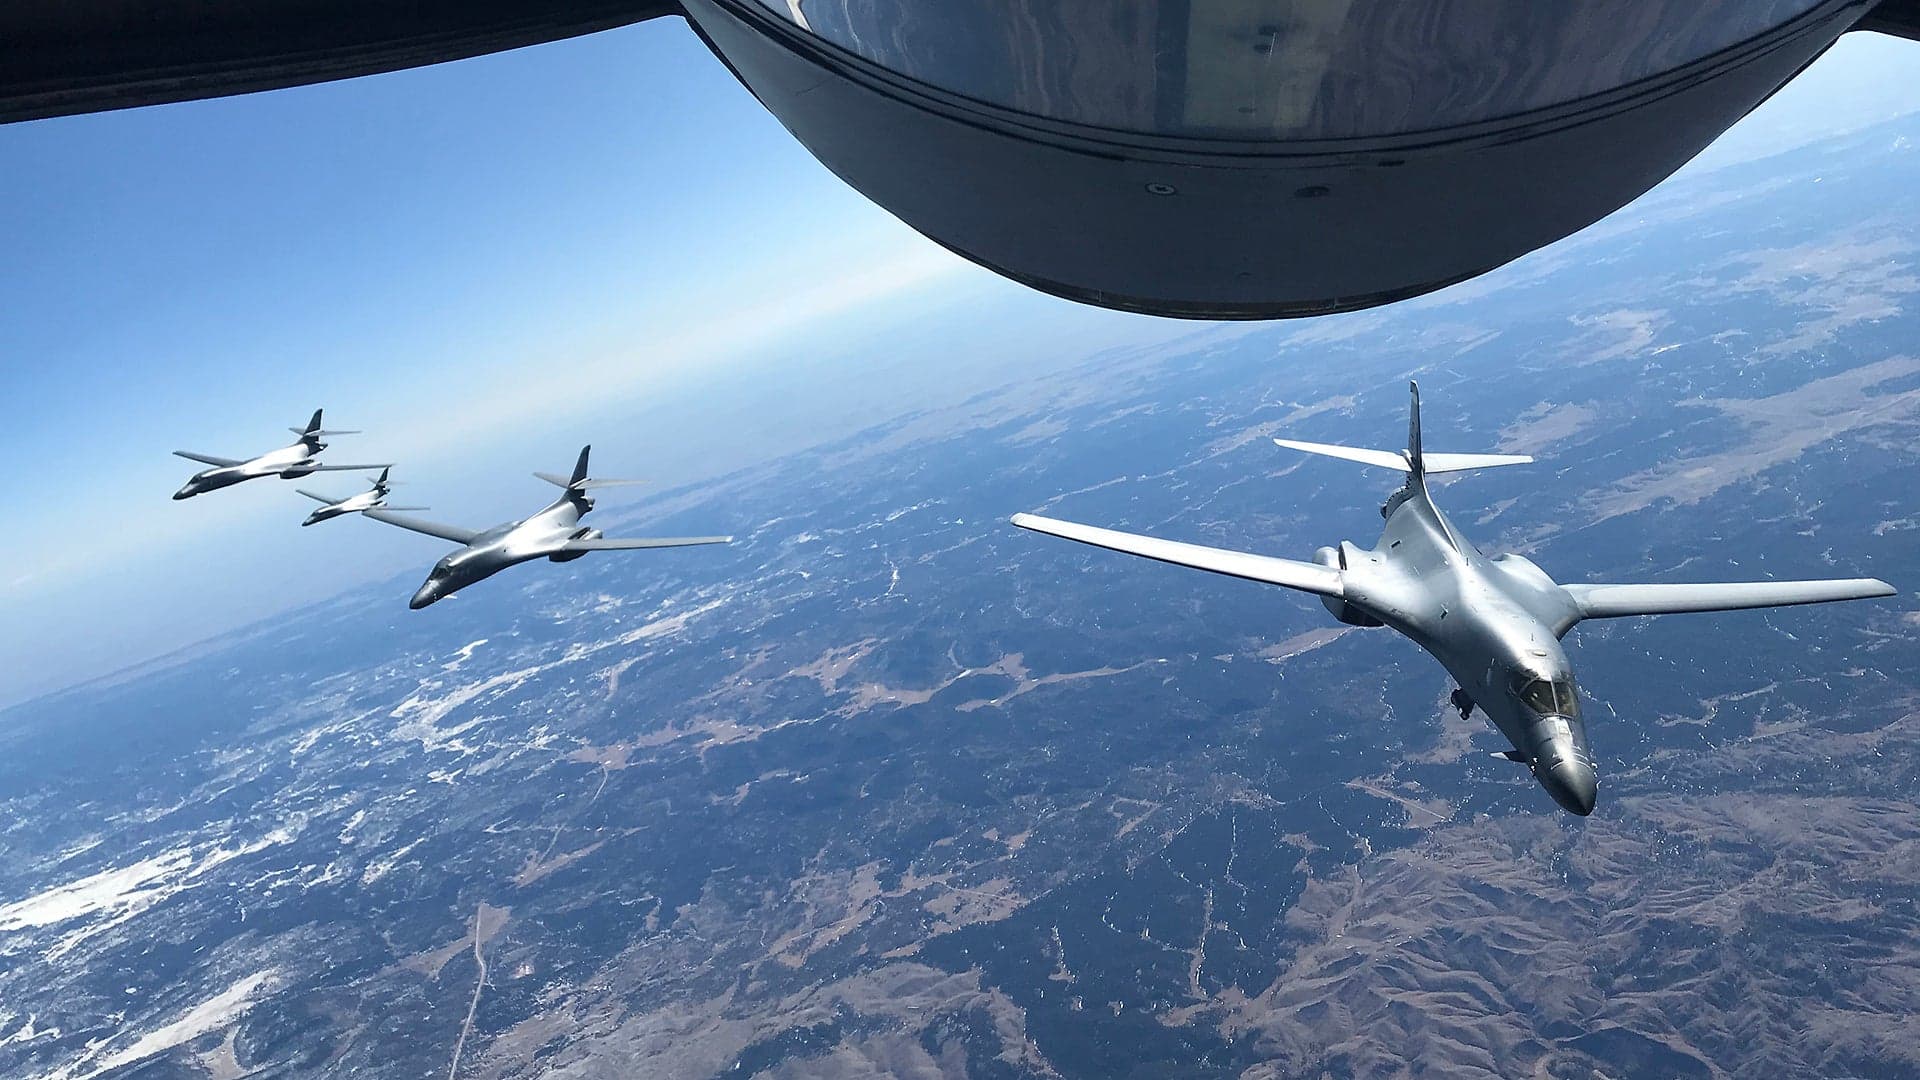 Tanker Boom Operator Photographs Rare And Glorious Formation Of Four B-1B Bombers